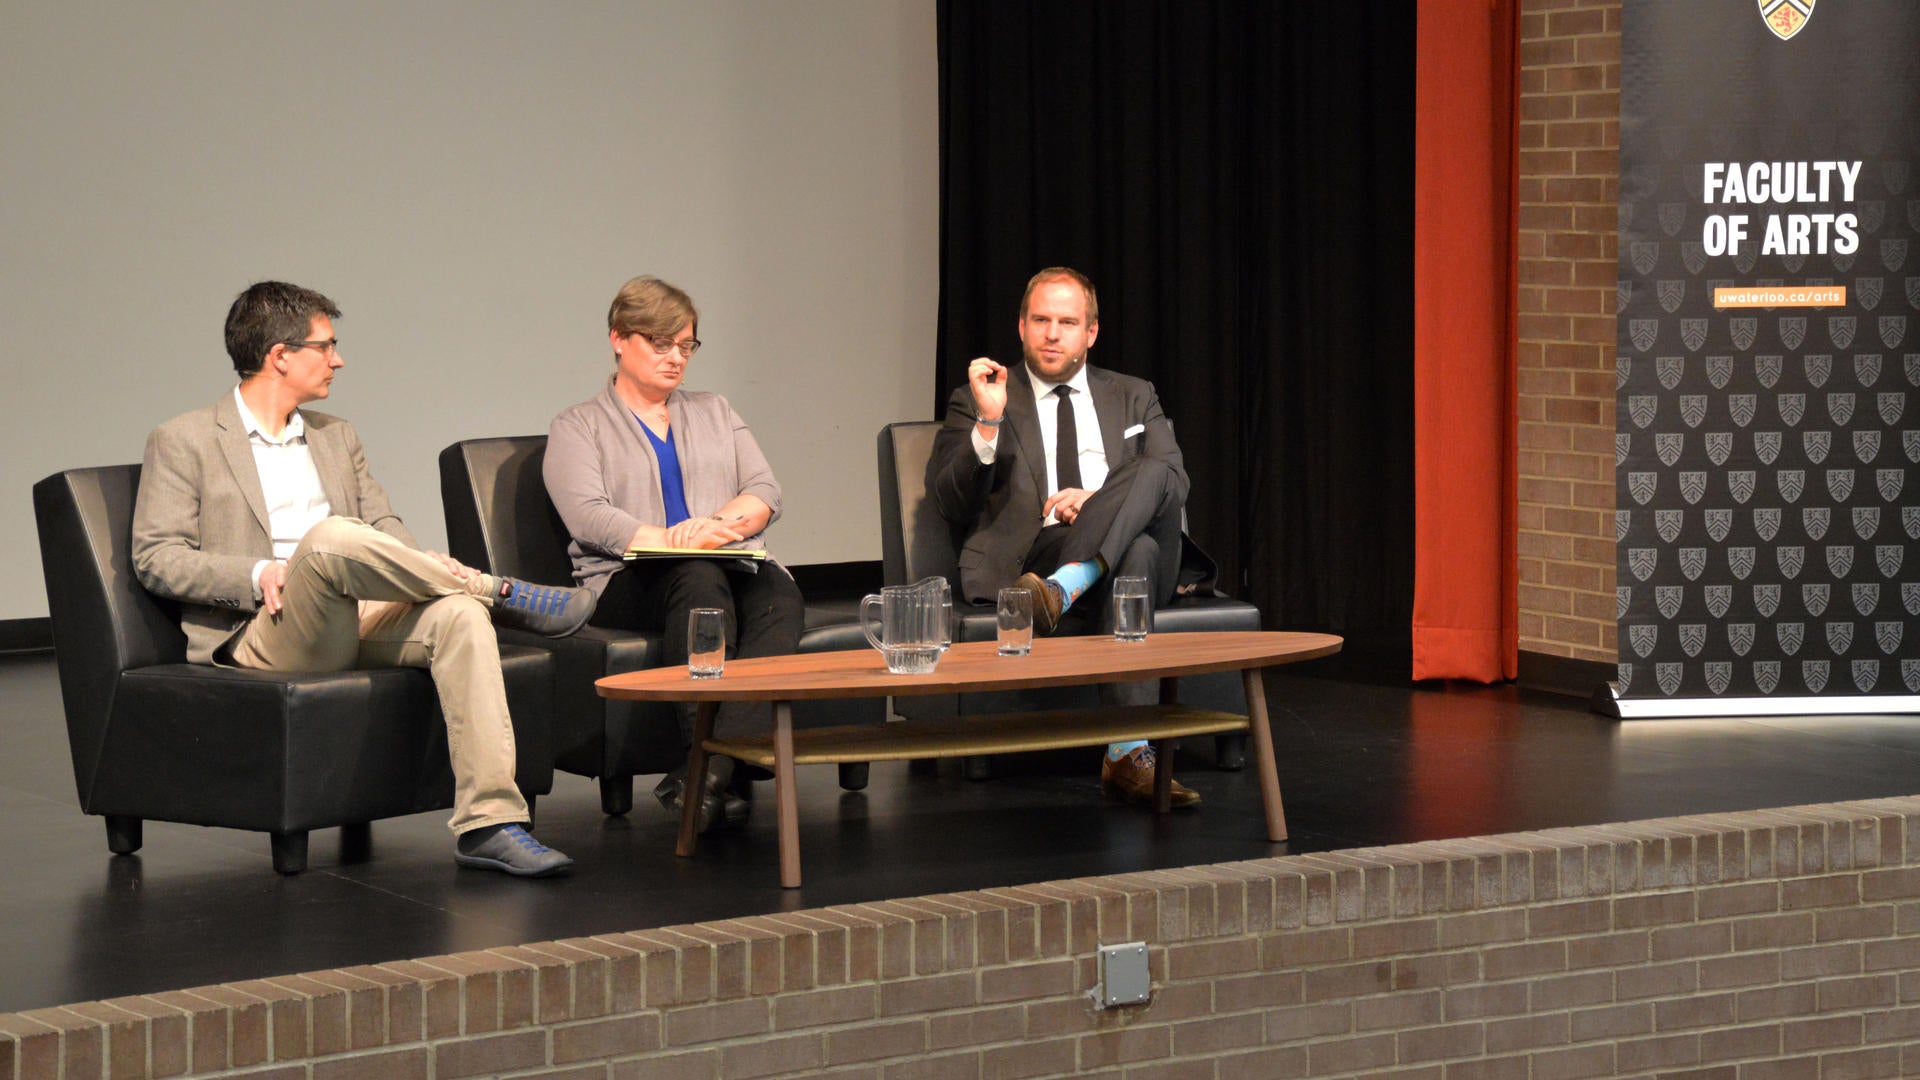 Joel Blit, Carla Fehr and Lennart Nacke in a panel discussion